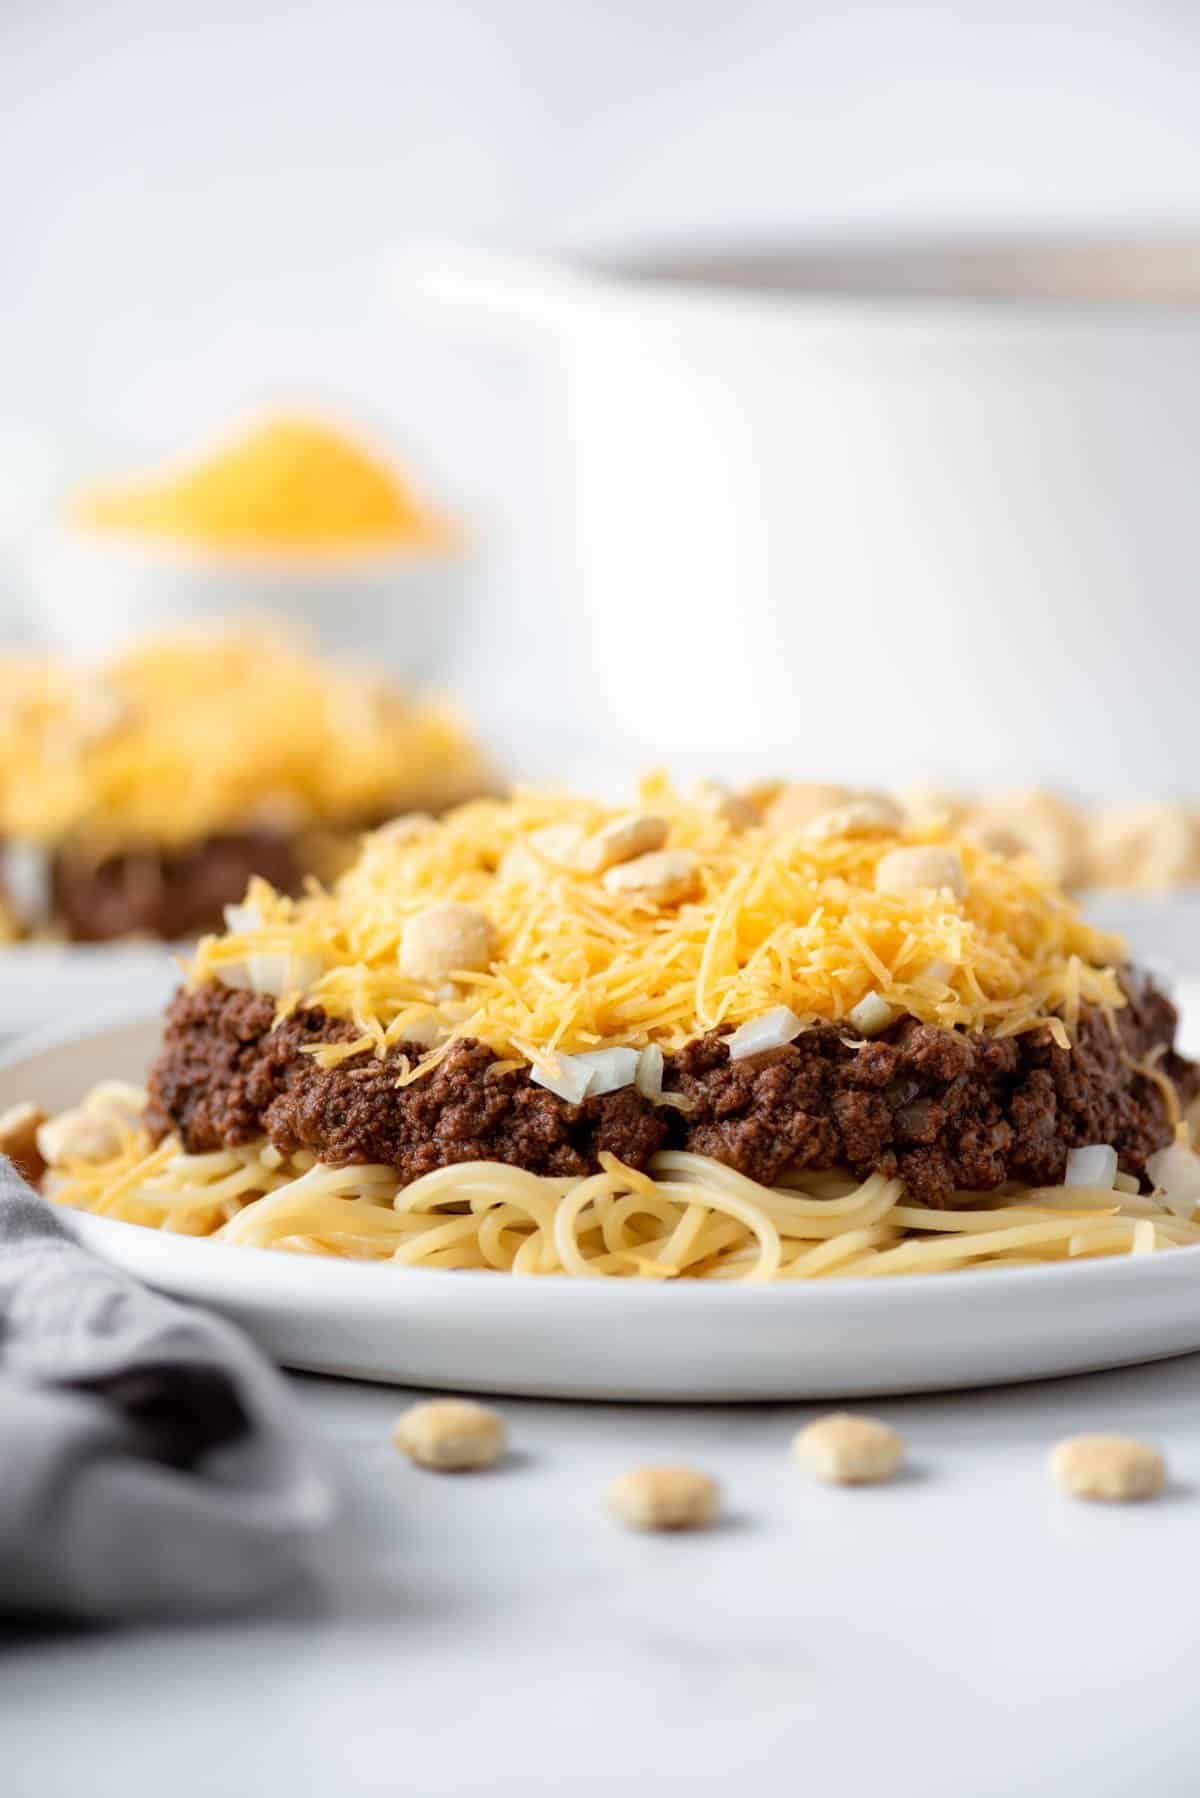 A mound of Cincinnati chili sauce on top of spaghetti noodles in front of a white pot and another plate.